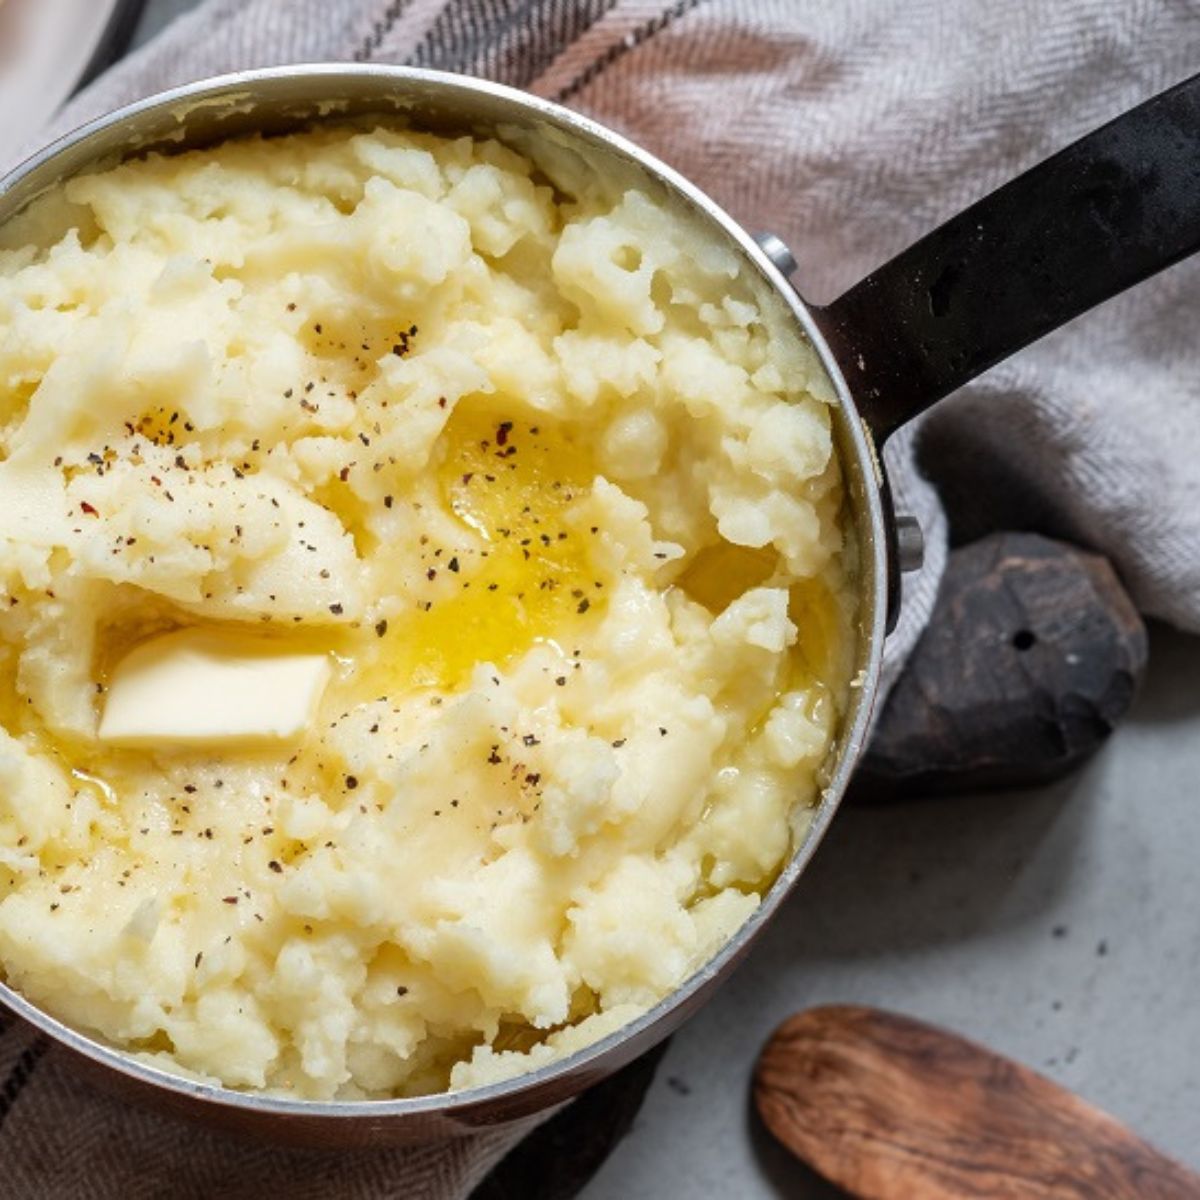 How to Mash Potatoes Without a Masher